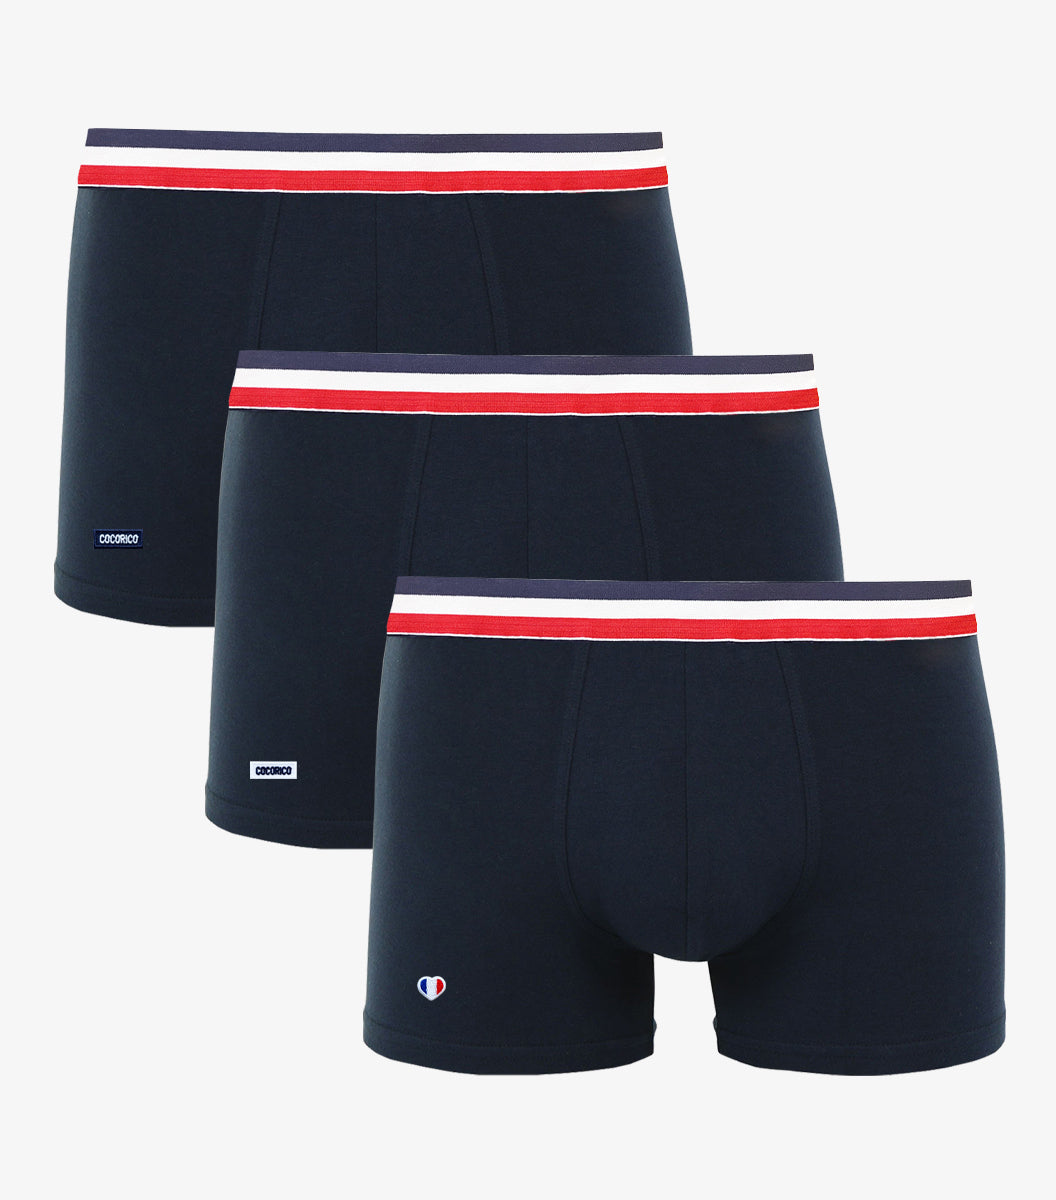 Boxer Homme Supporter Marine x3 - Pack brodé